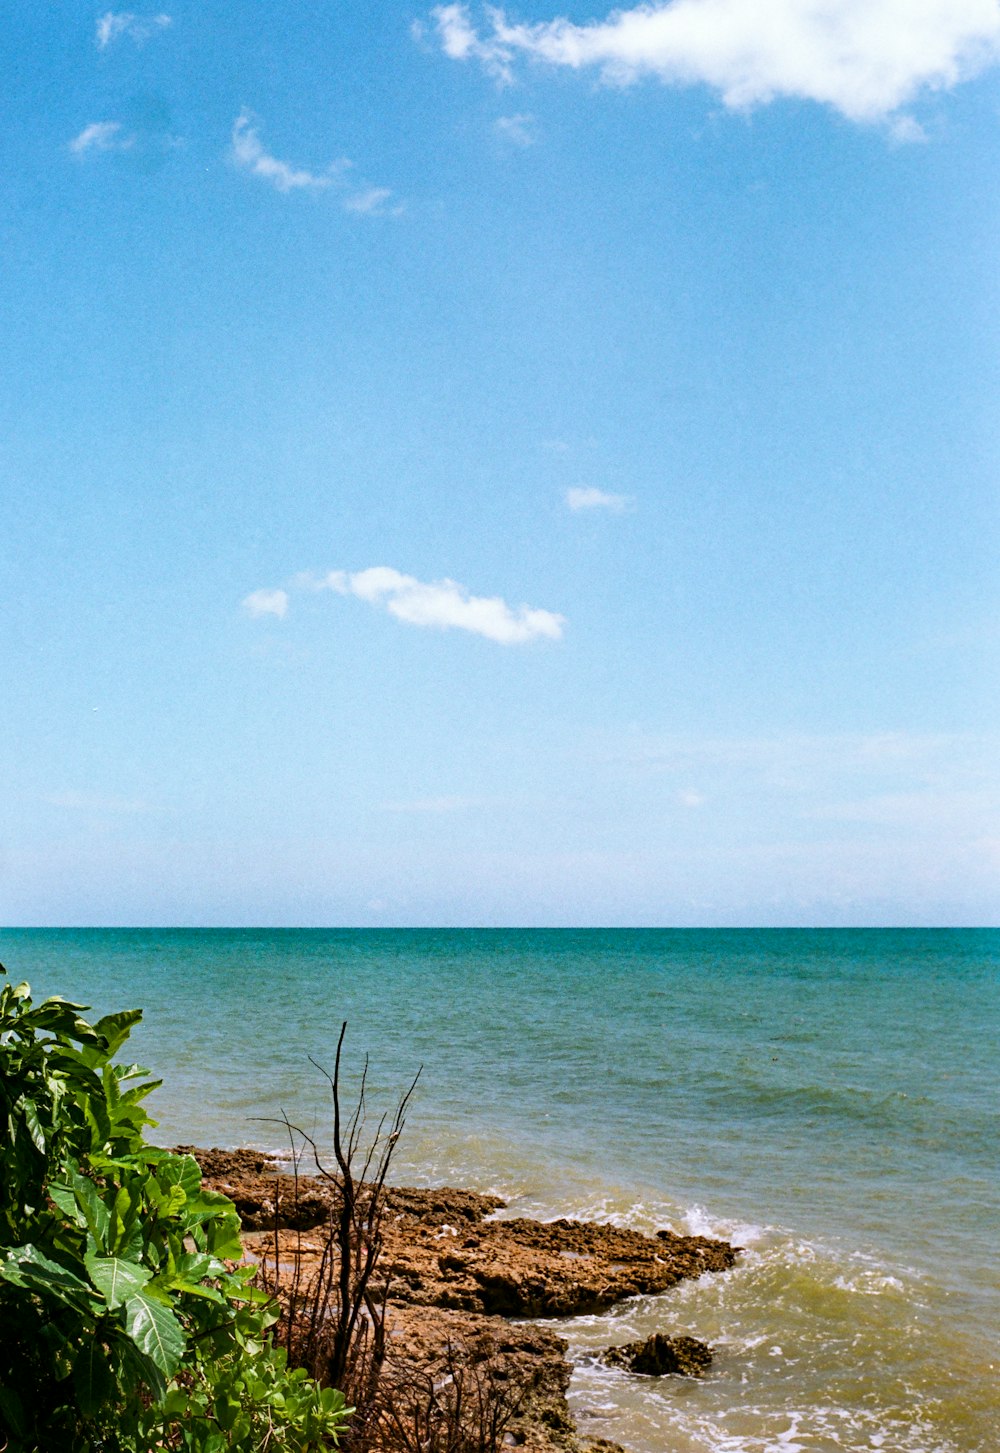 a view of the ocean from the shore of a beach